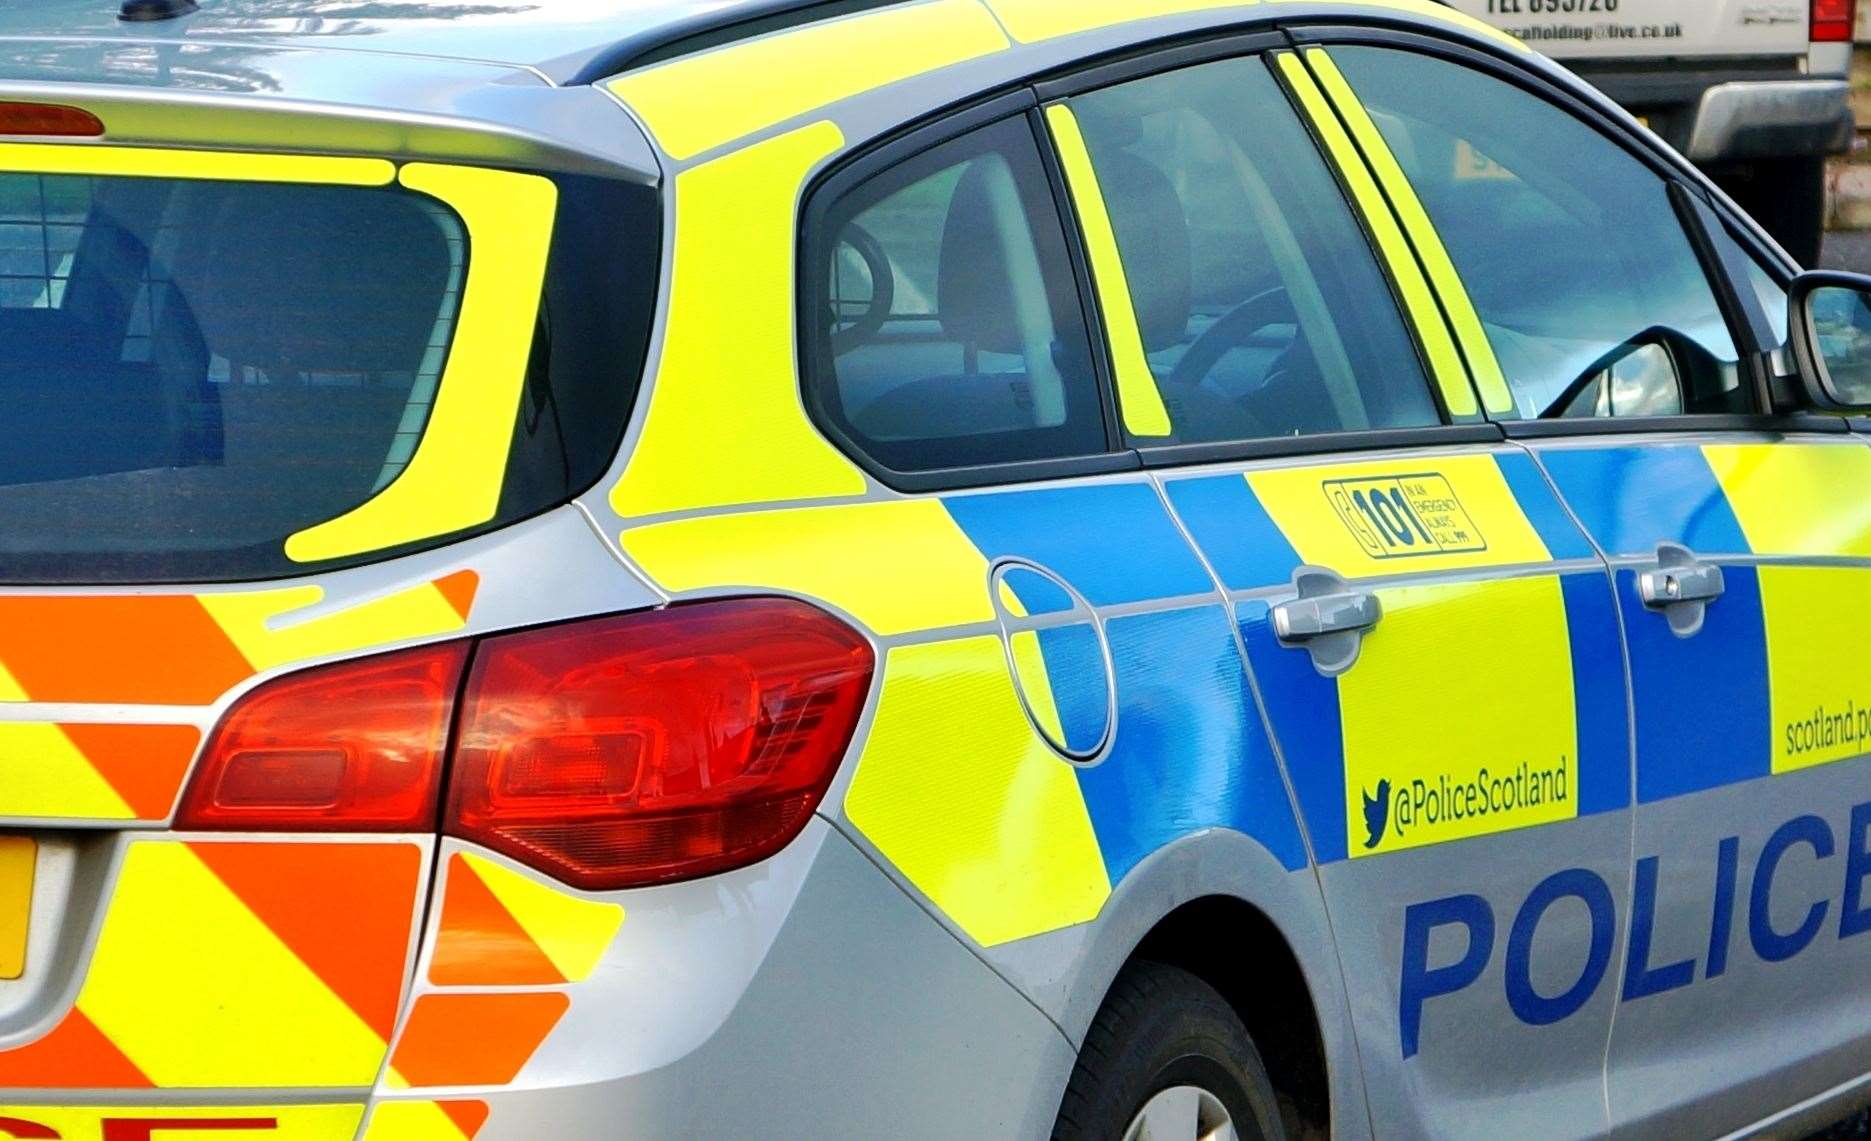 Police Scotland is appealing for witnesses to a speeding incident on the A9 at Tore on Friday.